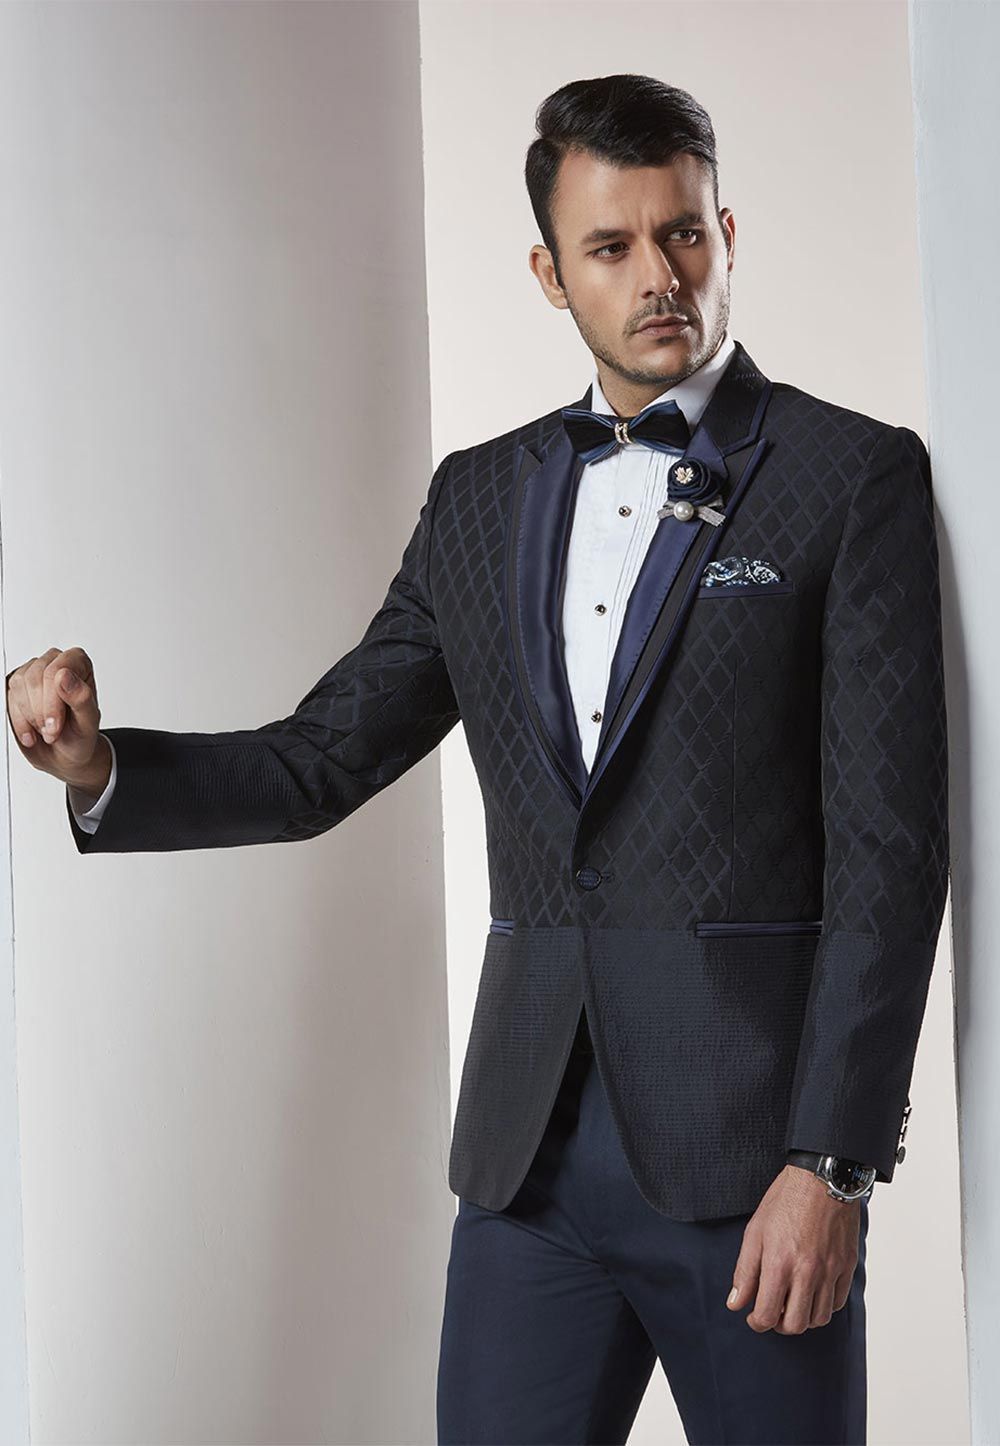 6 Unique Wedding Suit Colors Every Groom Should Consider - SWAGGER Magazine